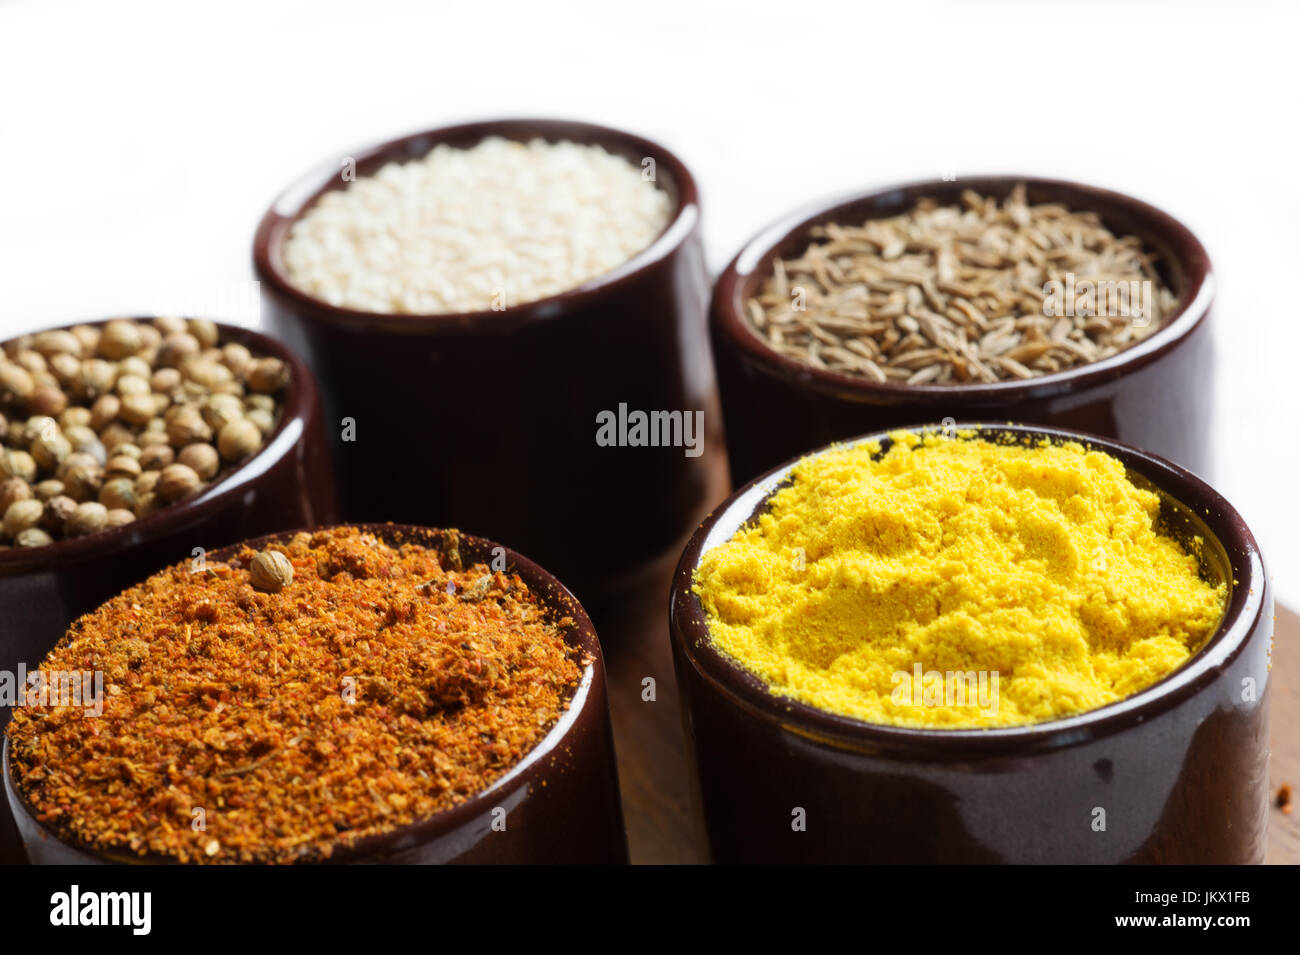 Spices and herbs in ceramic bowls. seasoning. Colorful natural additives. Stock Photo